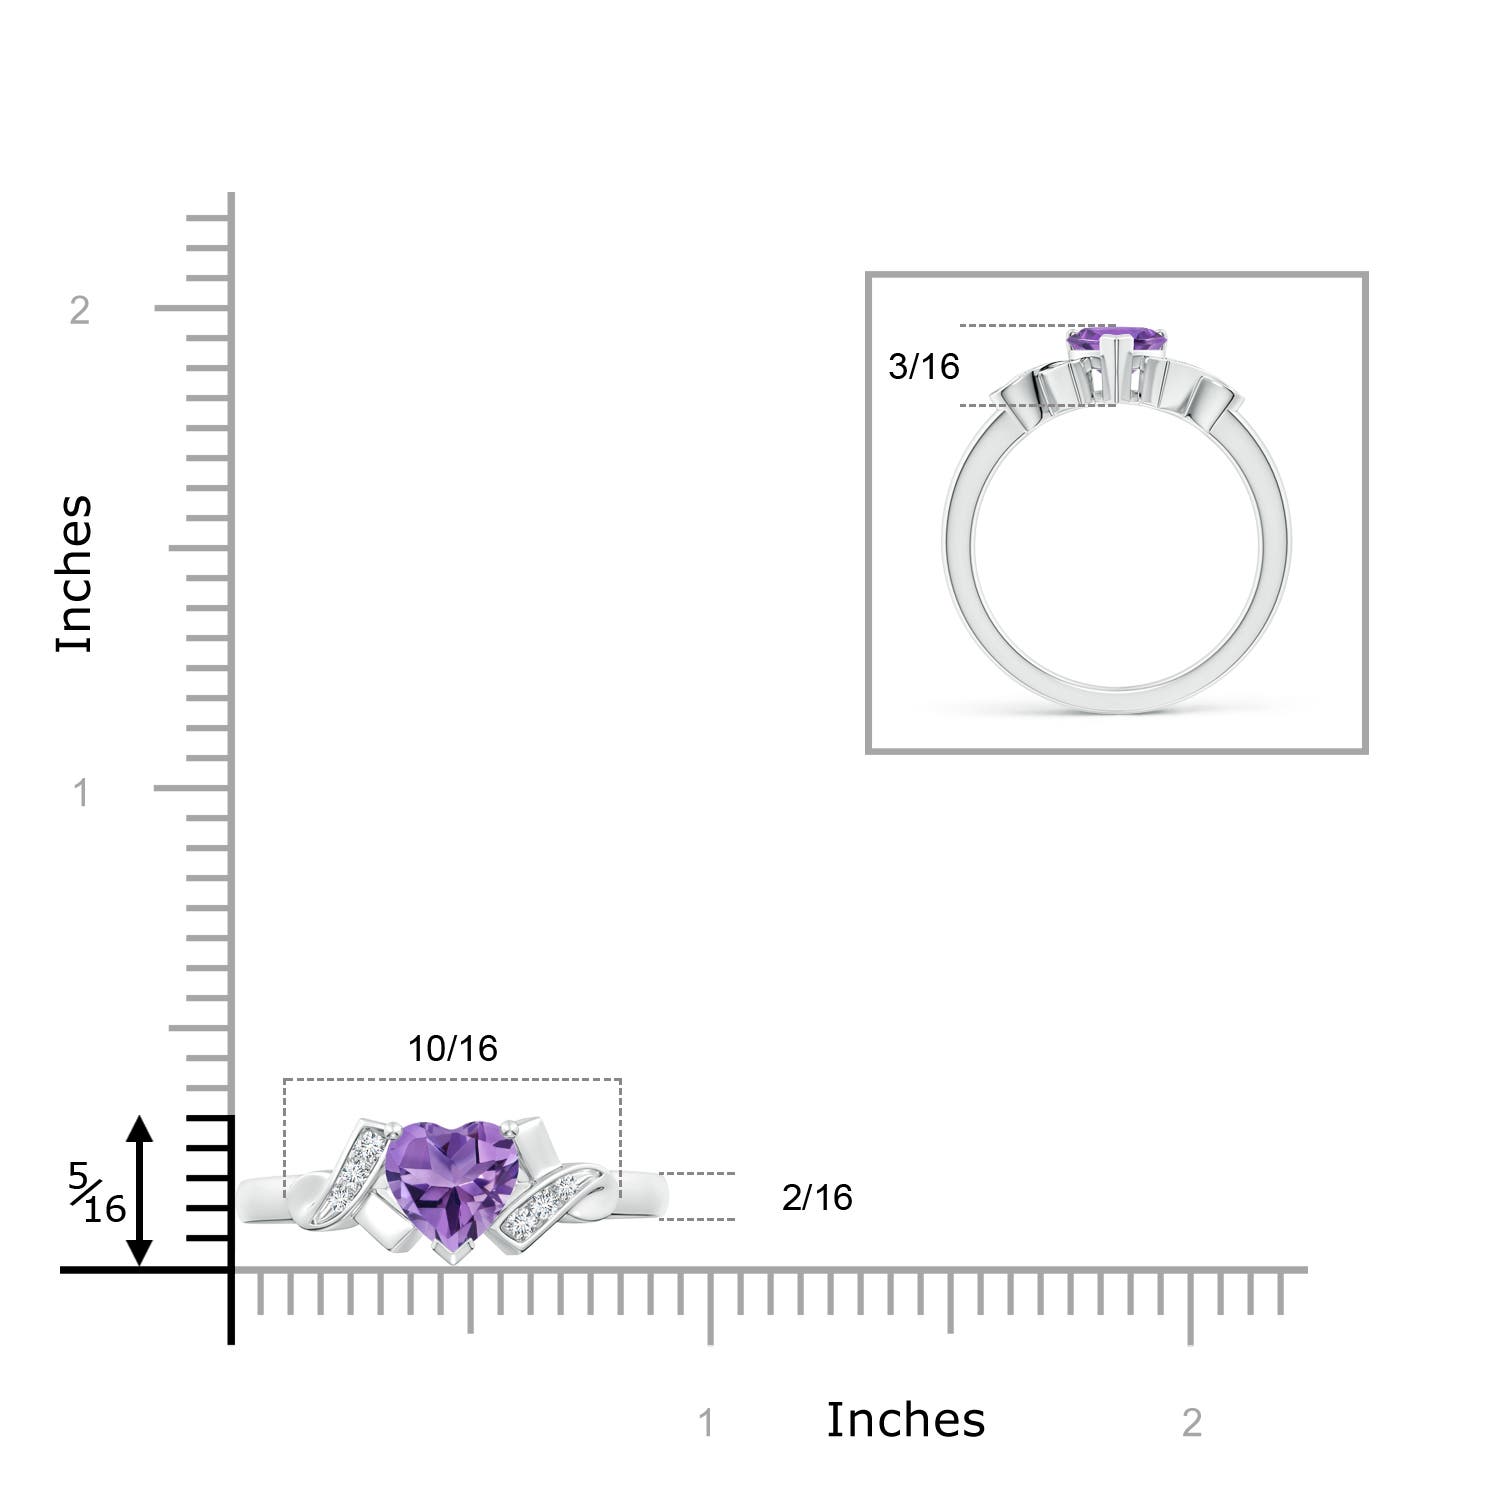 AA - Amethyst / 0.76 CT / 14 KT White Gold